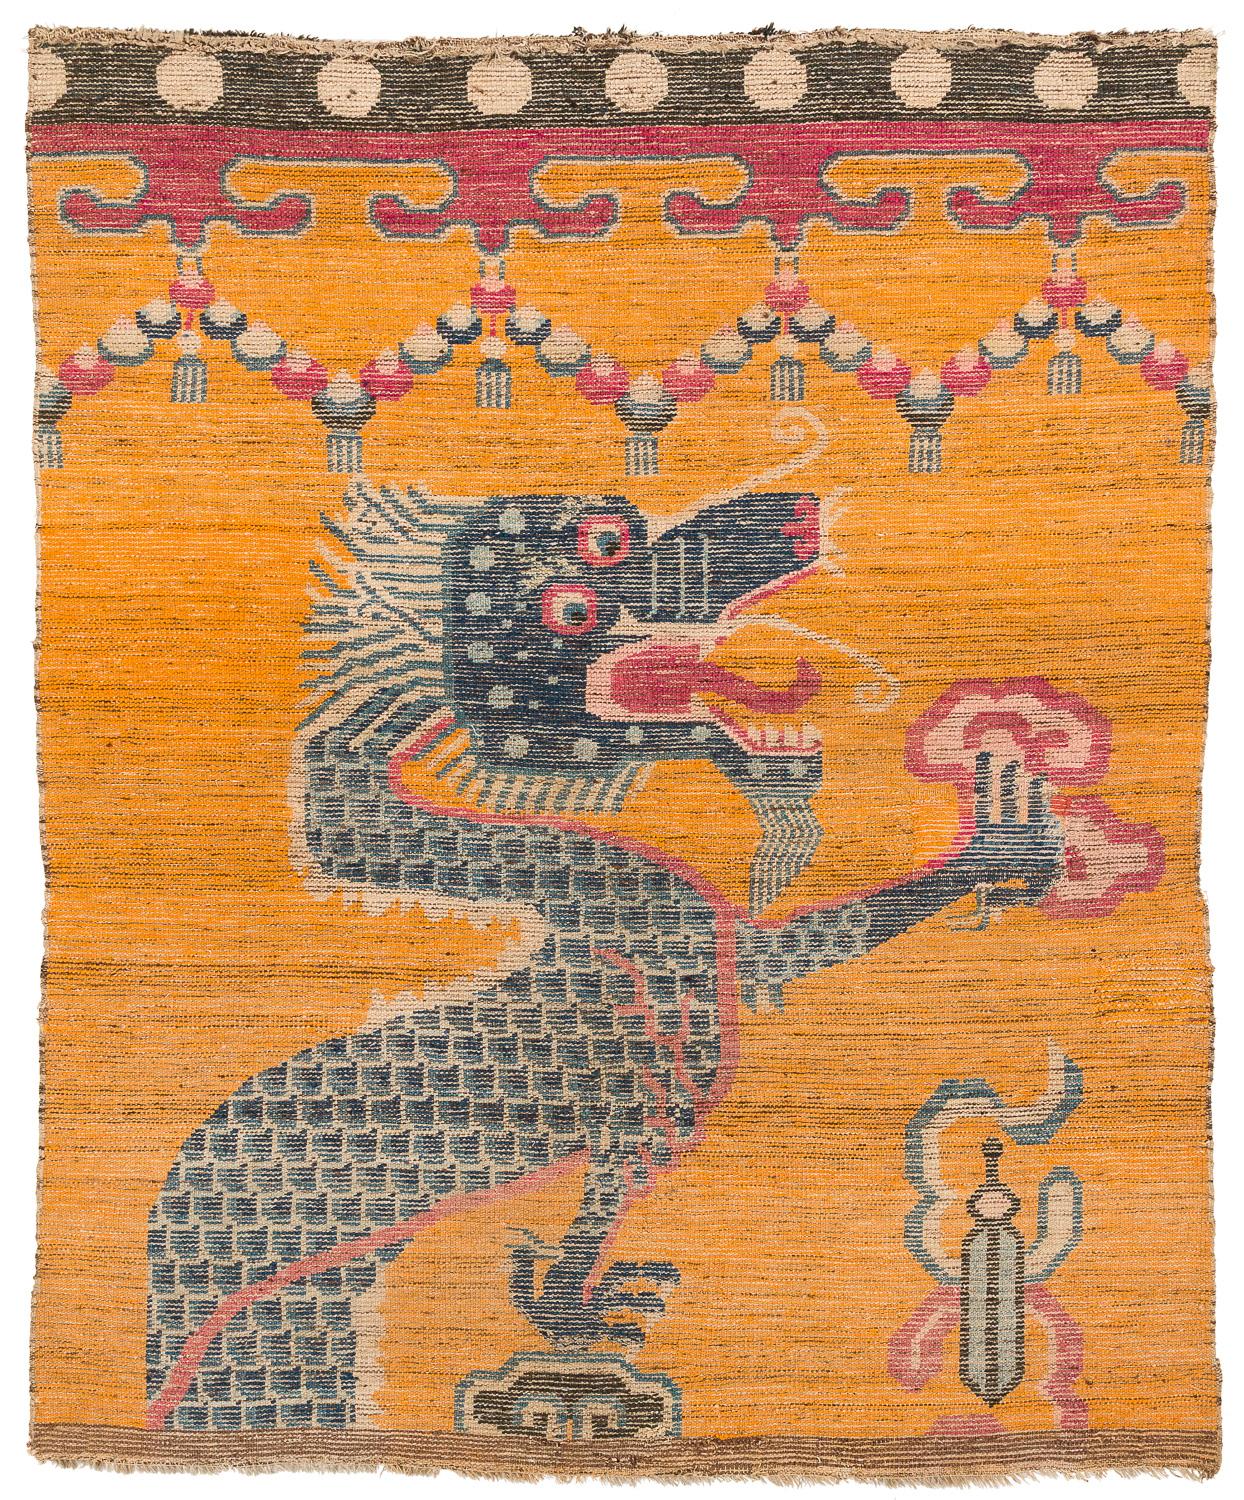 This piece is a fragmented rug and not complete. It is a Chinese pillar rug, probably woven for a Tibetan monastery. These rugs were hung around pillars in the monasteries.

This rug originally would have had the bottom of dragon, so we can tell